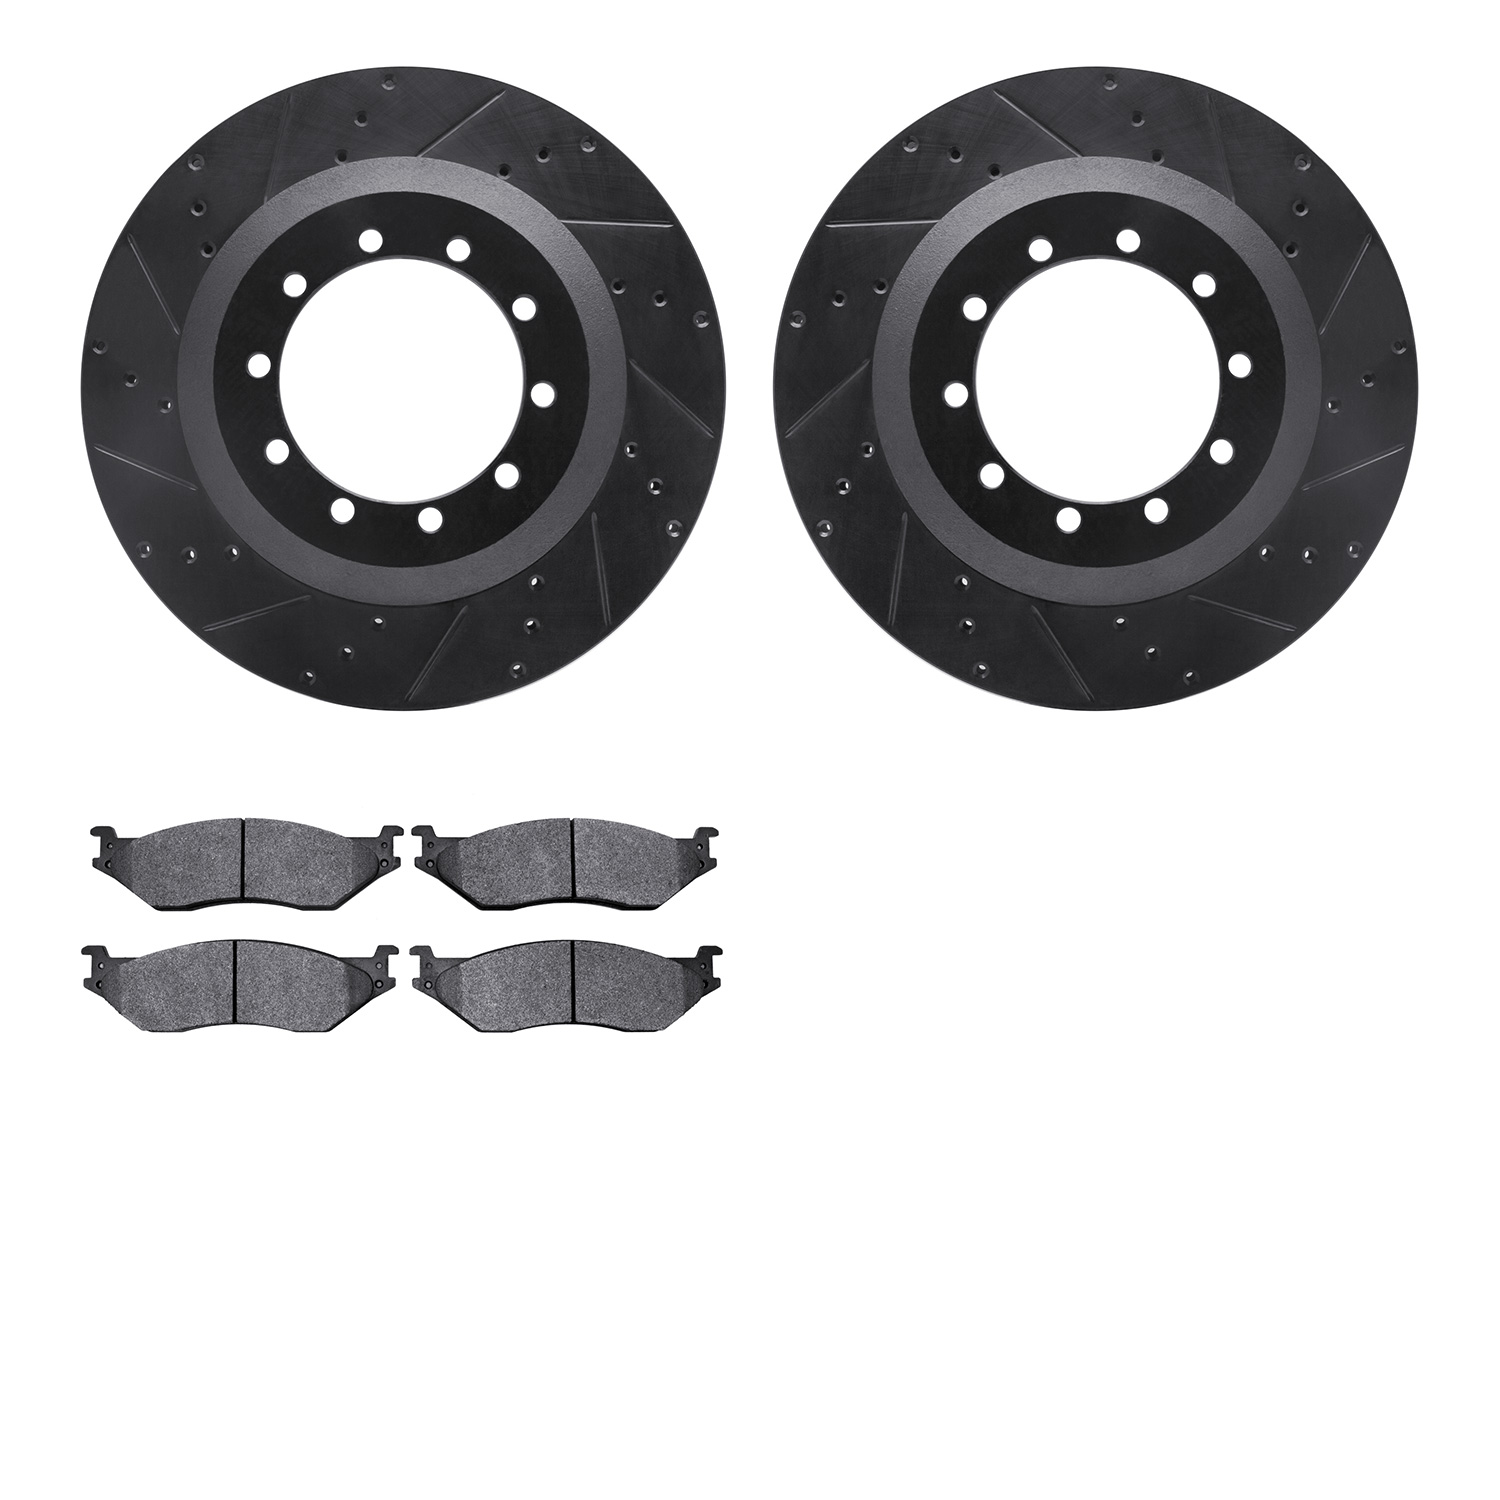 8402-54046 Drilled/Slotted Brake Rotors with Ultimate-Duty Brake Pads Kit [Black], 2006-2019 Ford/Lincoln/Mercury/Mazda, Positio